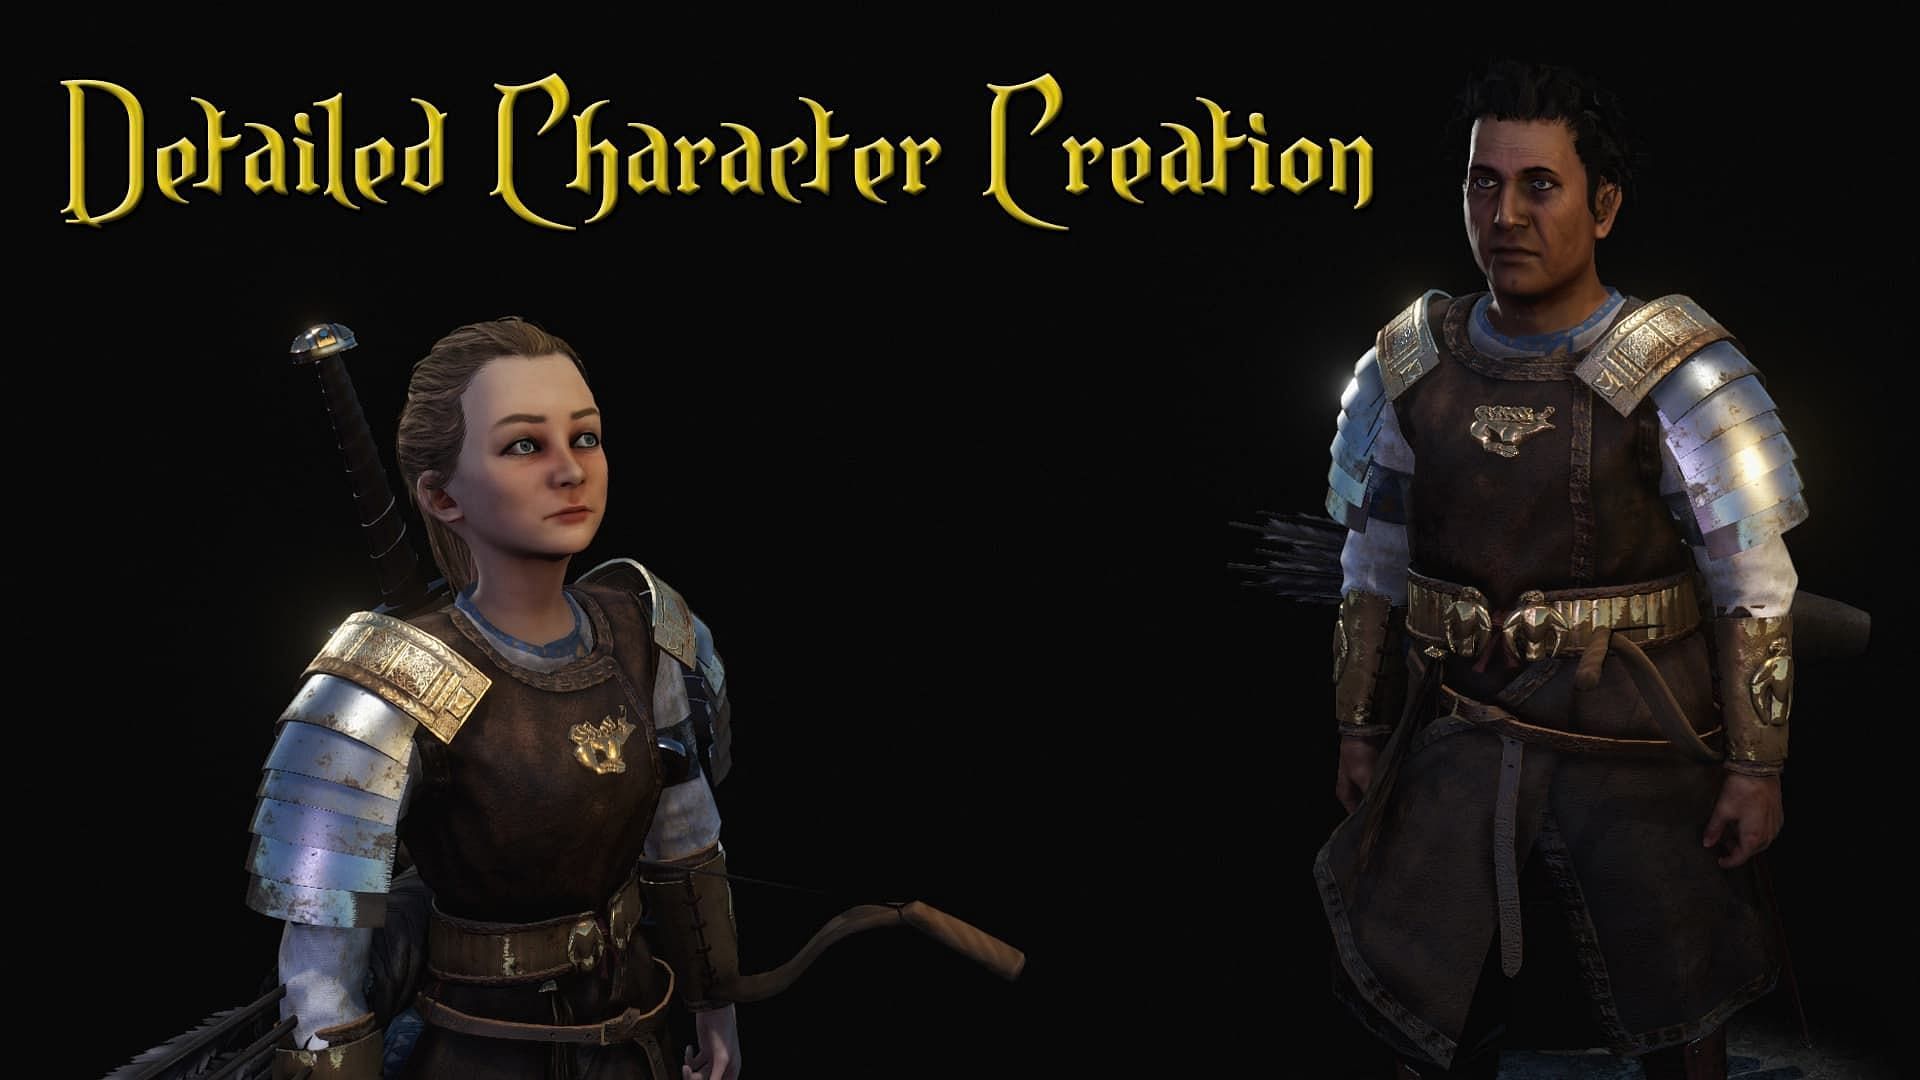 Detailed Character Creation is a mod that improves upon the vanilla character creation (Image via Nexus Mods website)